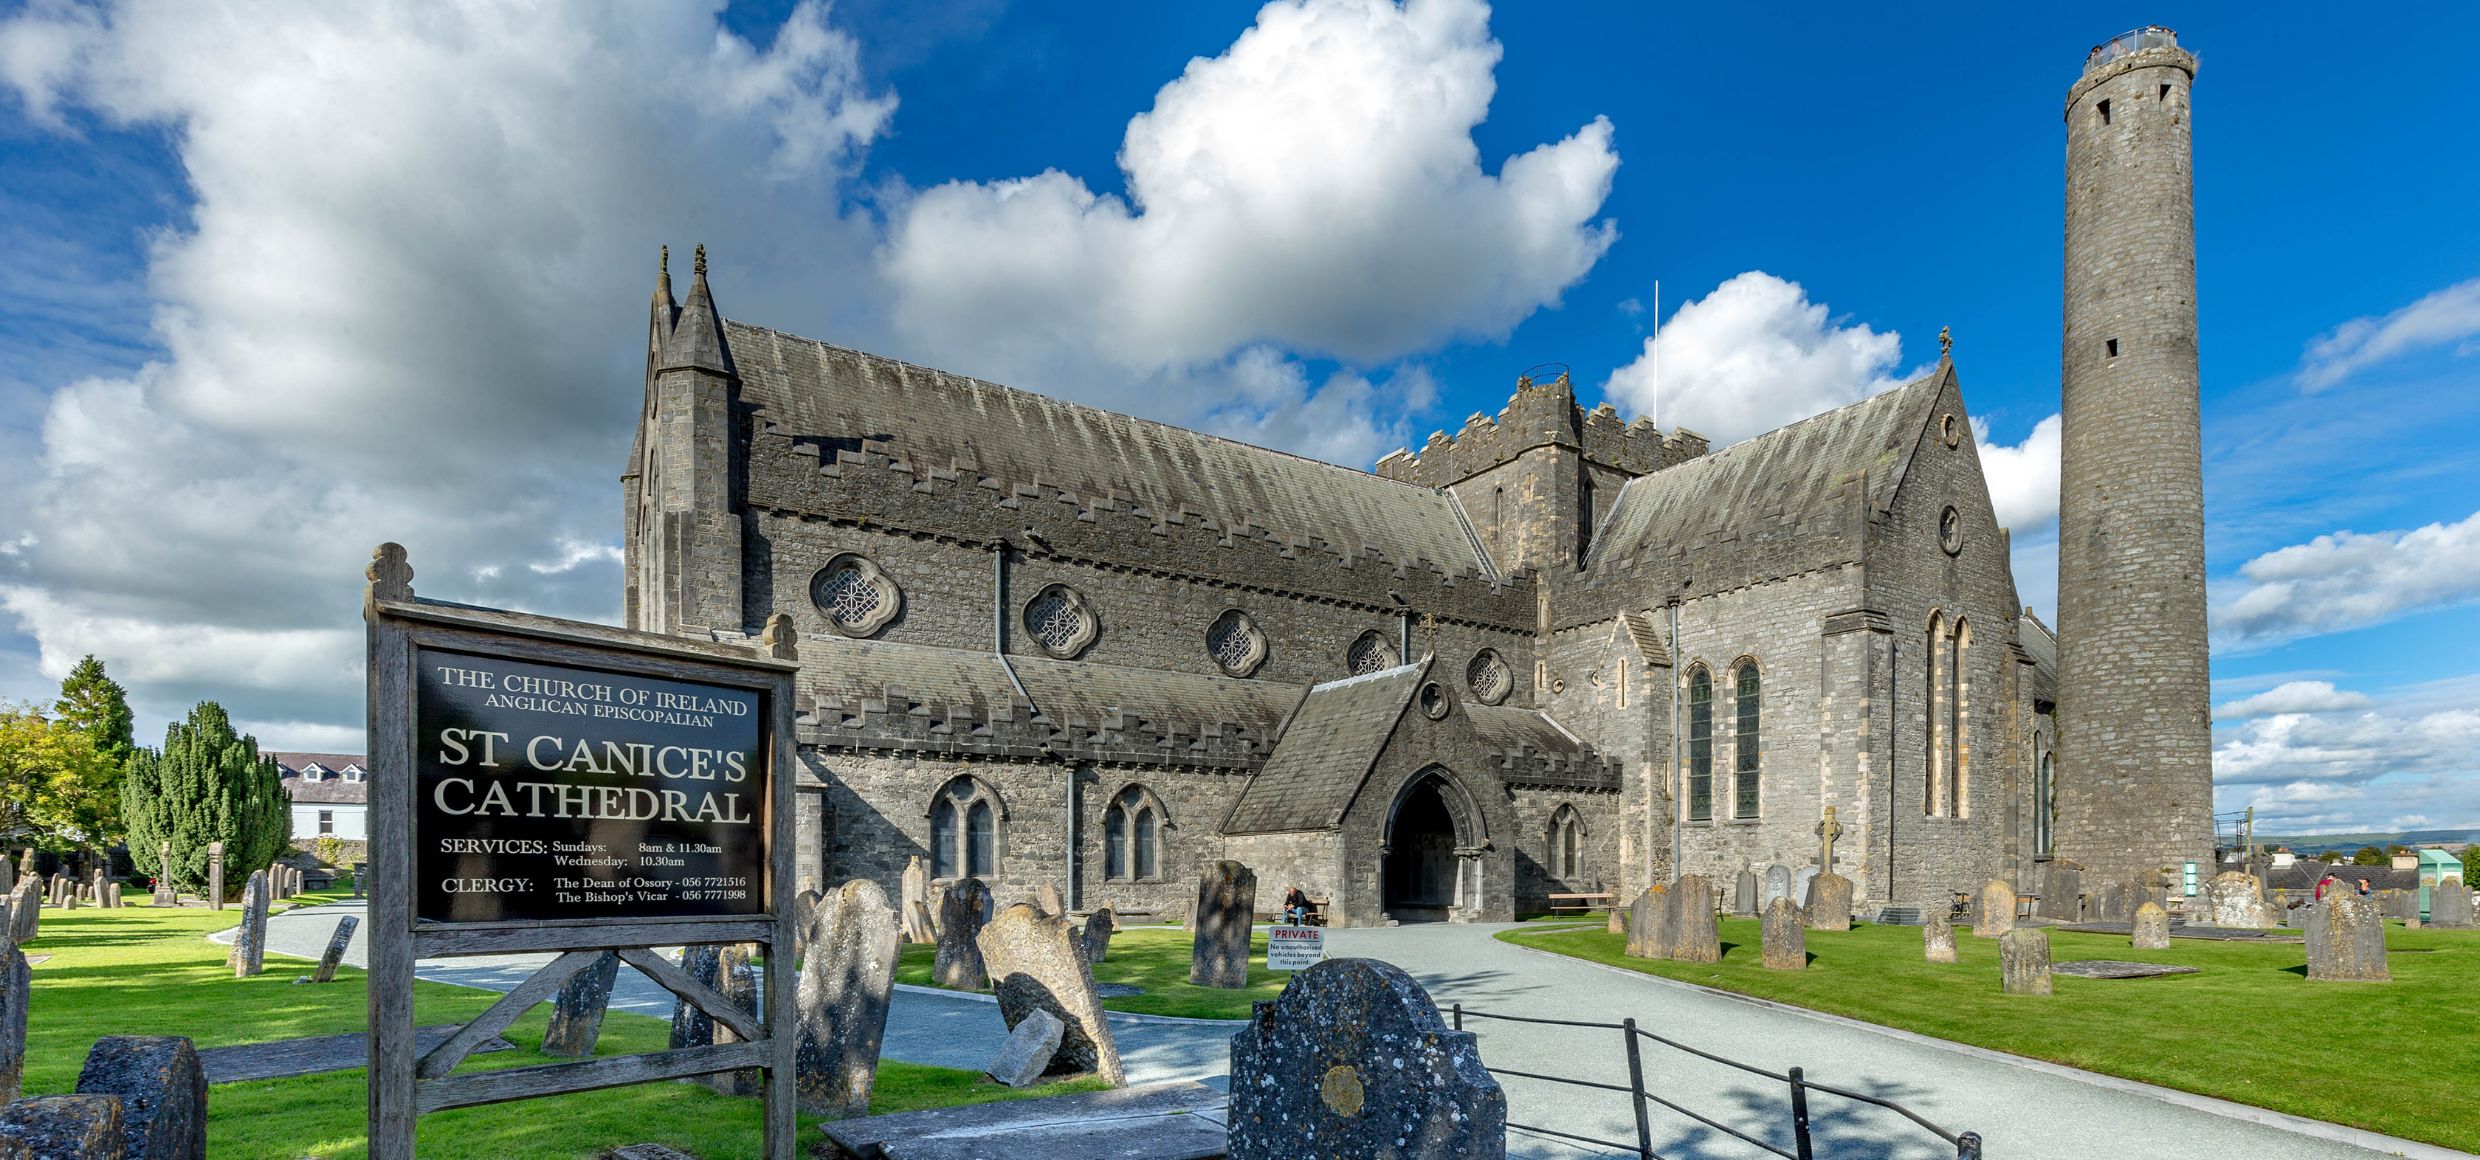 st-canices-cathedral-kilkenny-city_master